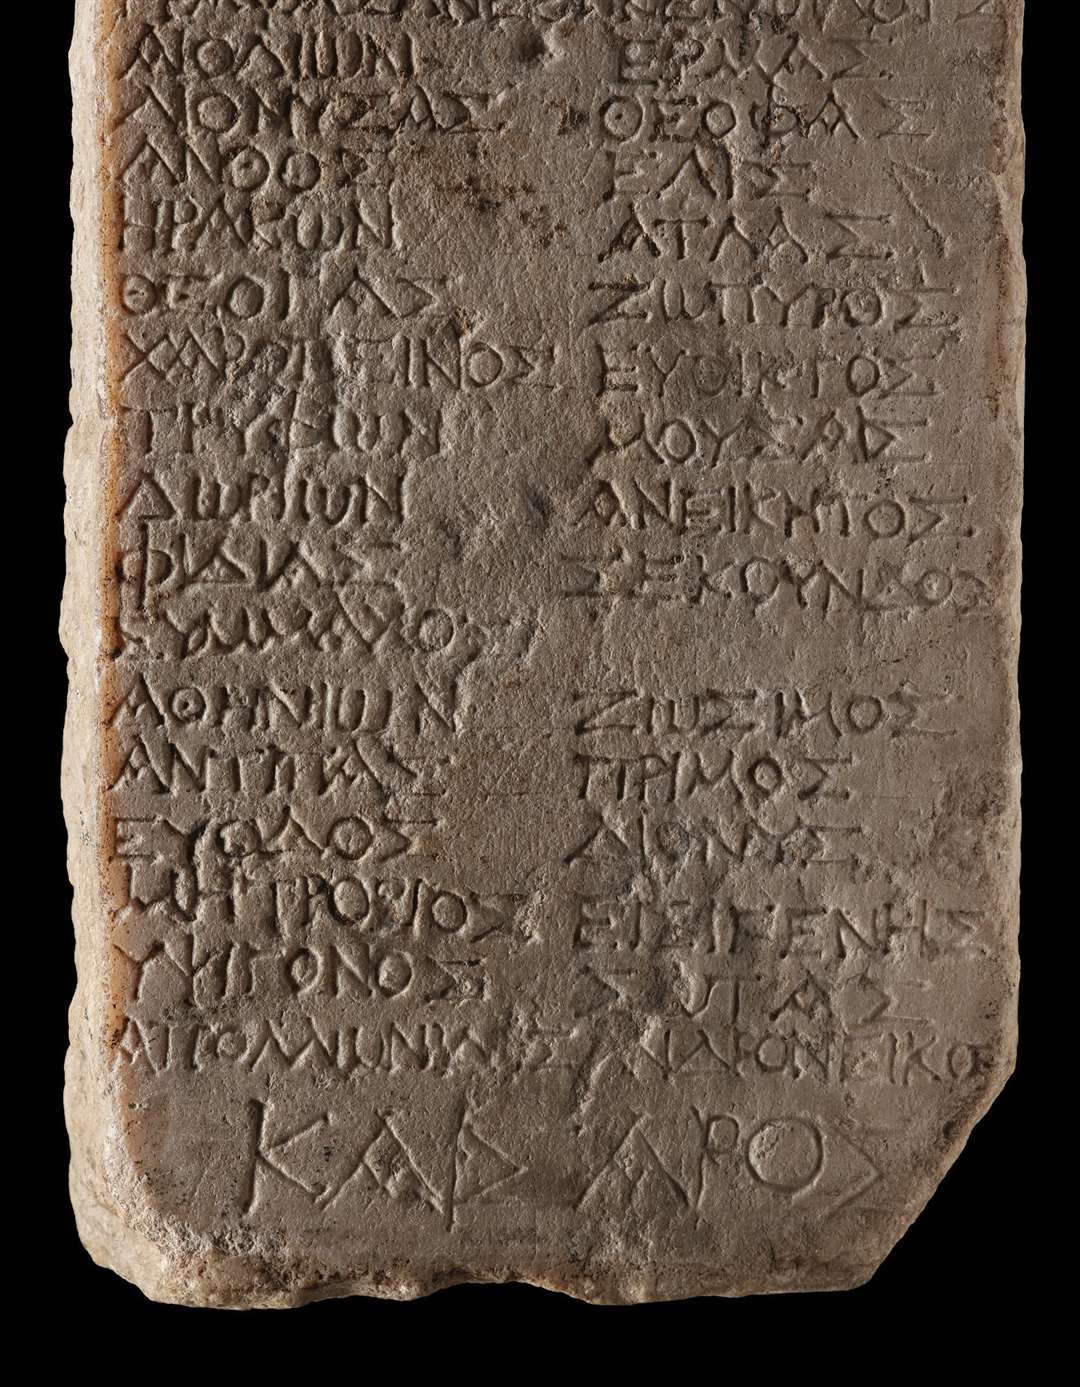 The stone is inscribed with a list of names (National Museums Scotland/PA)